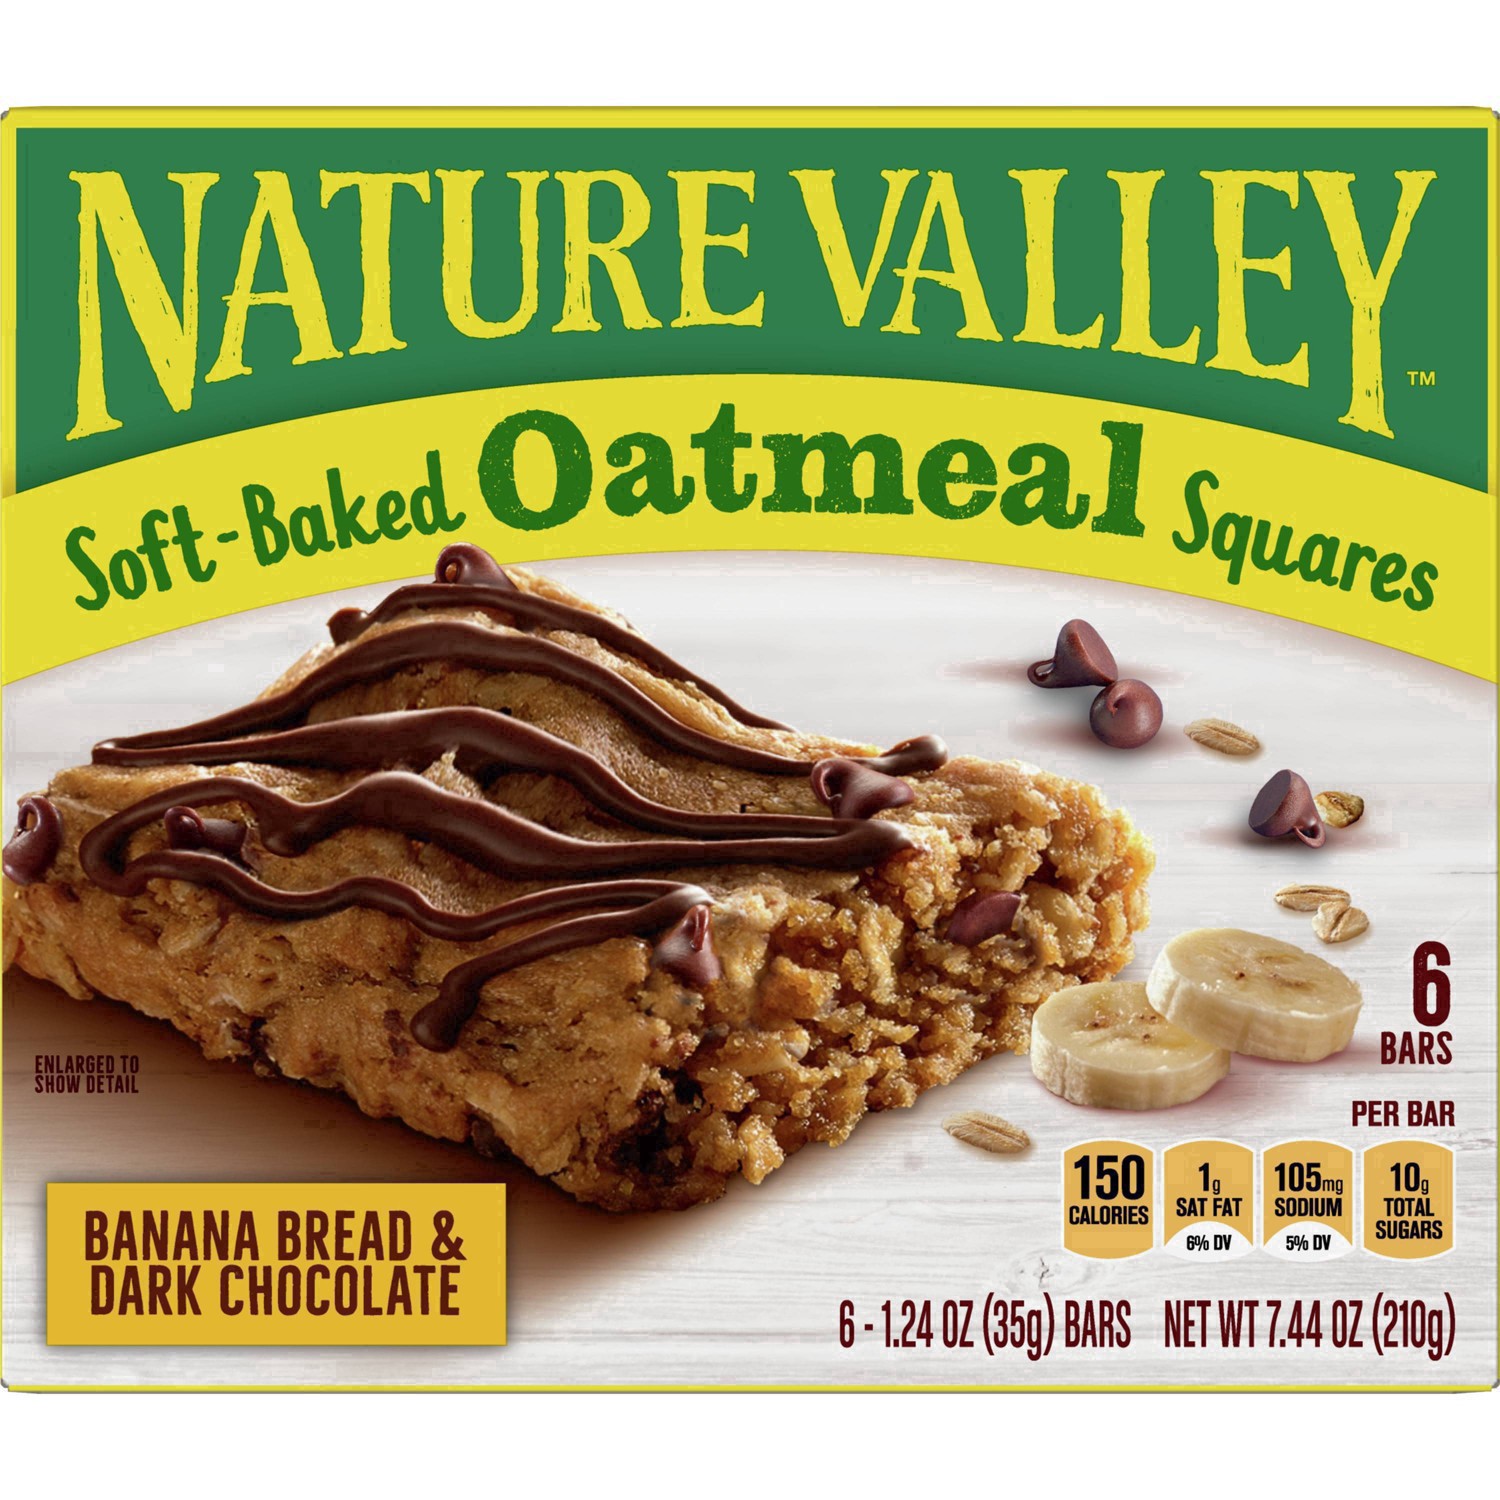 slide 89 of 101, Nature Valley Soft-Baked Oatmeal Squares, Banana Bread & Dark Chocolate, 6 ct, 6 ct